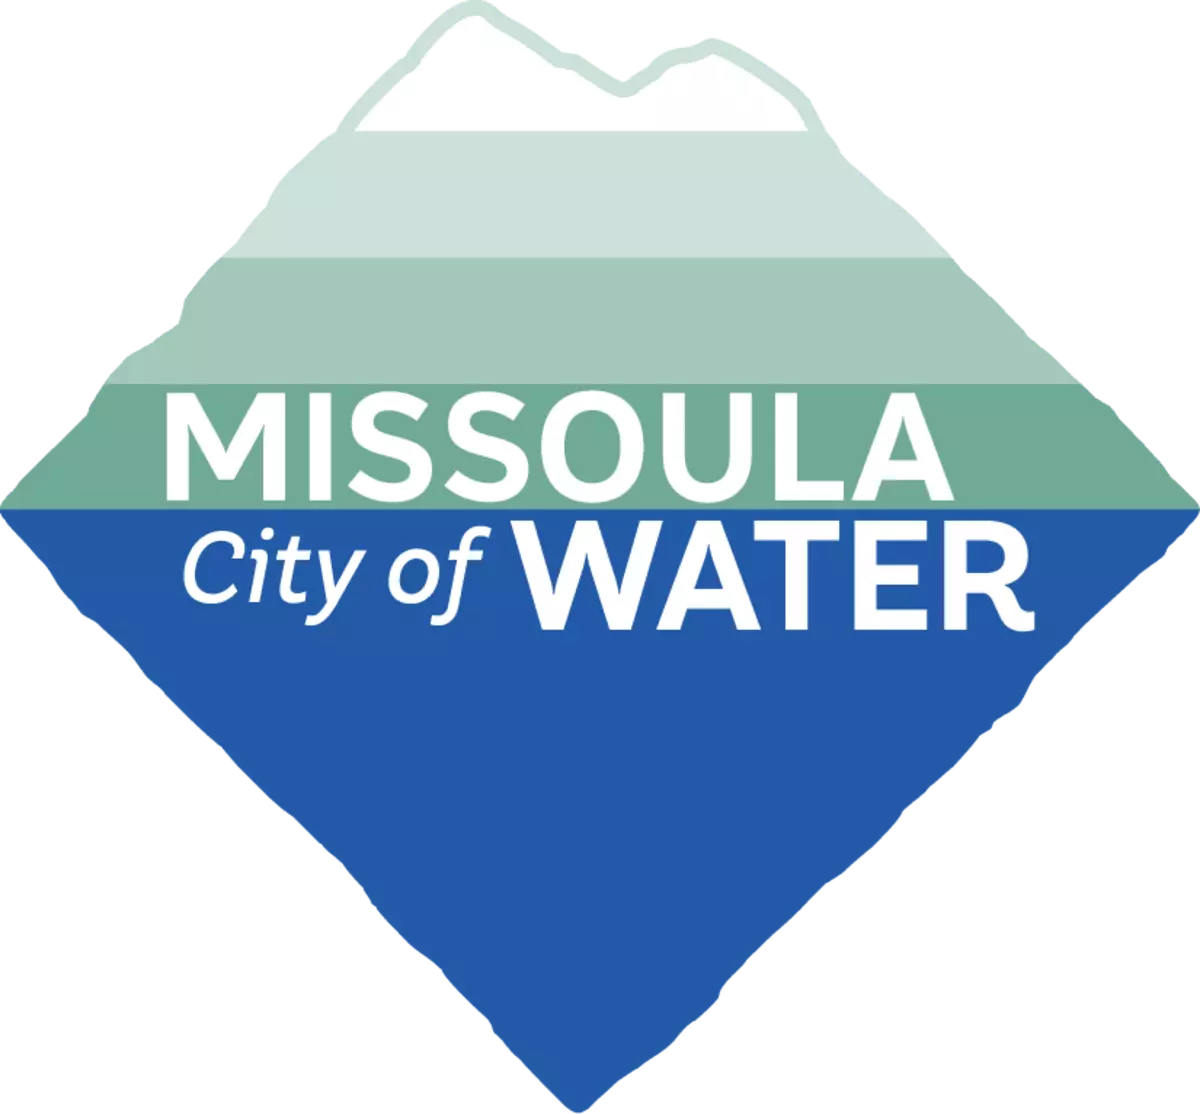 Missoula Water budget includes mainline replacements in 2018